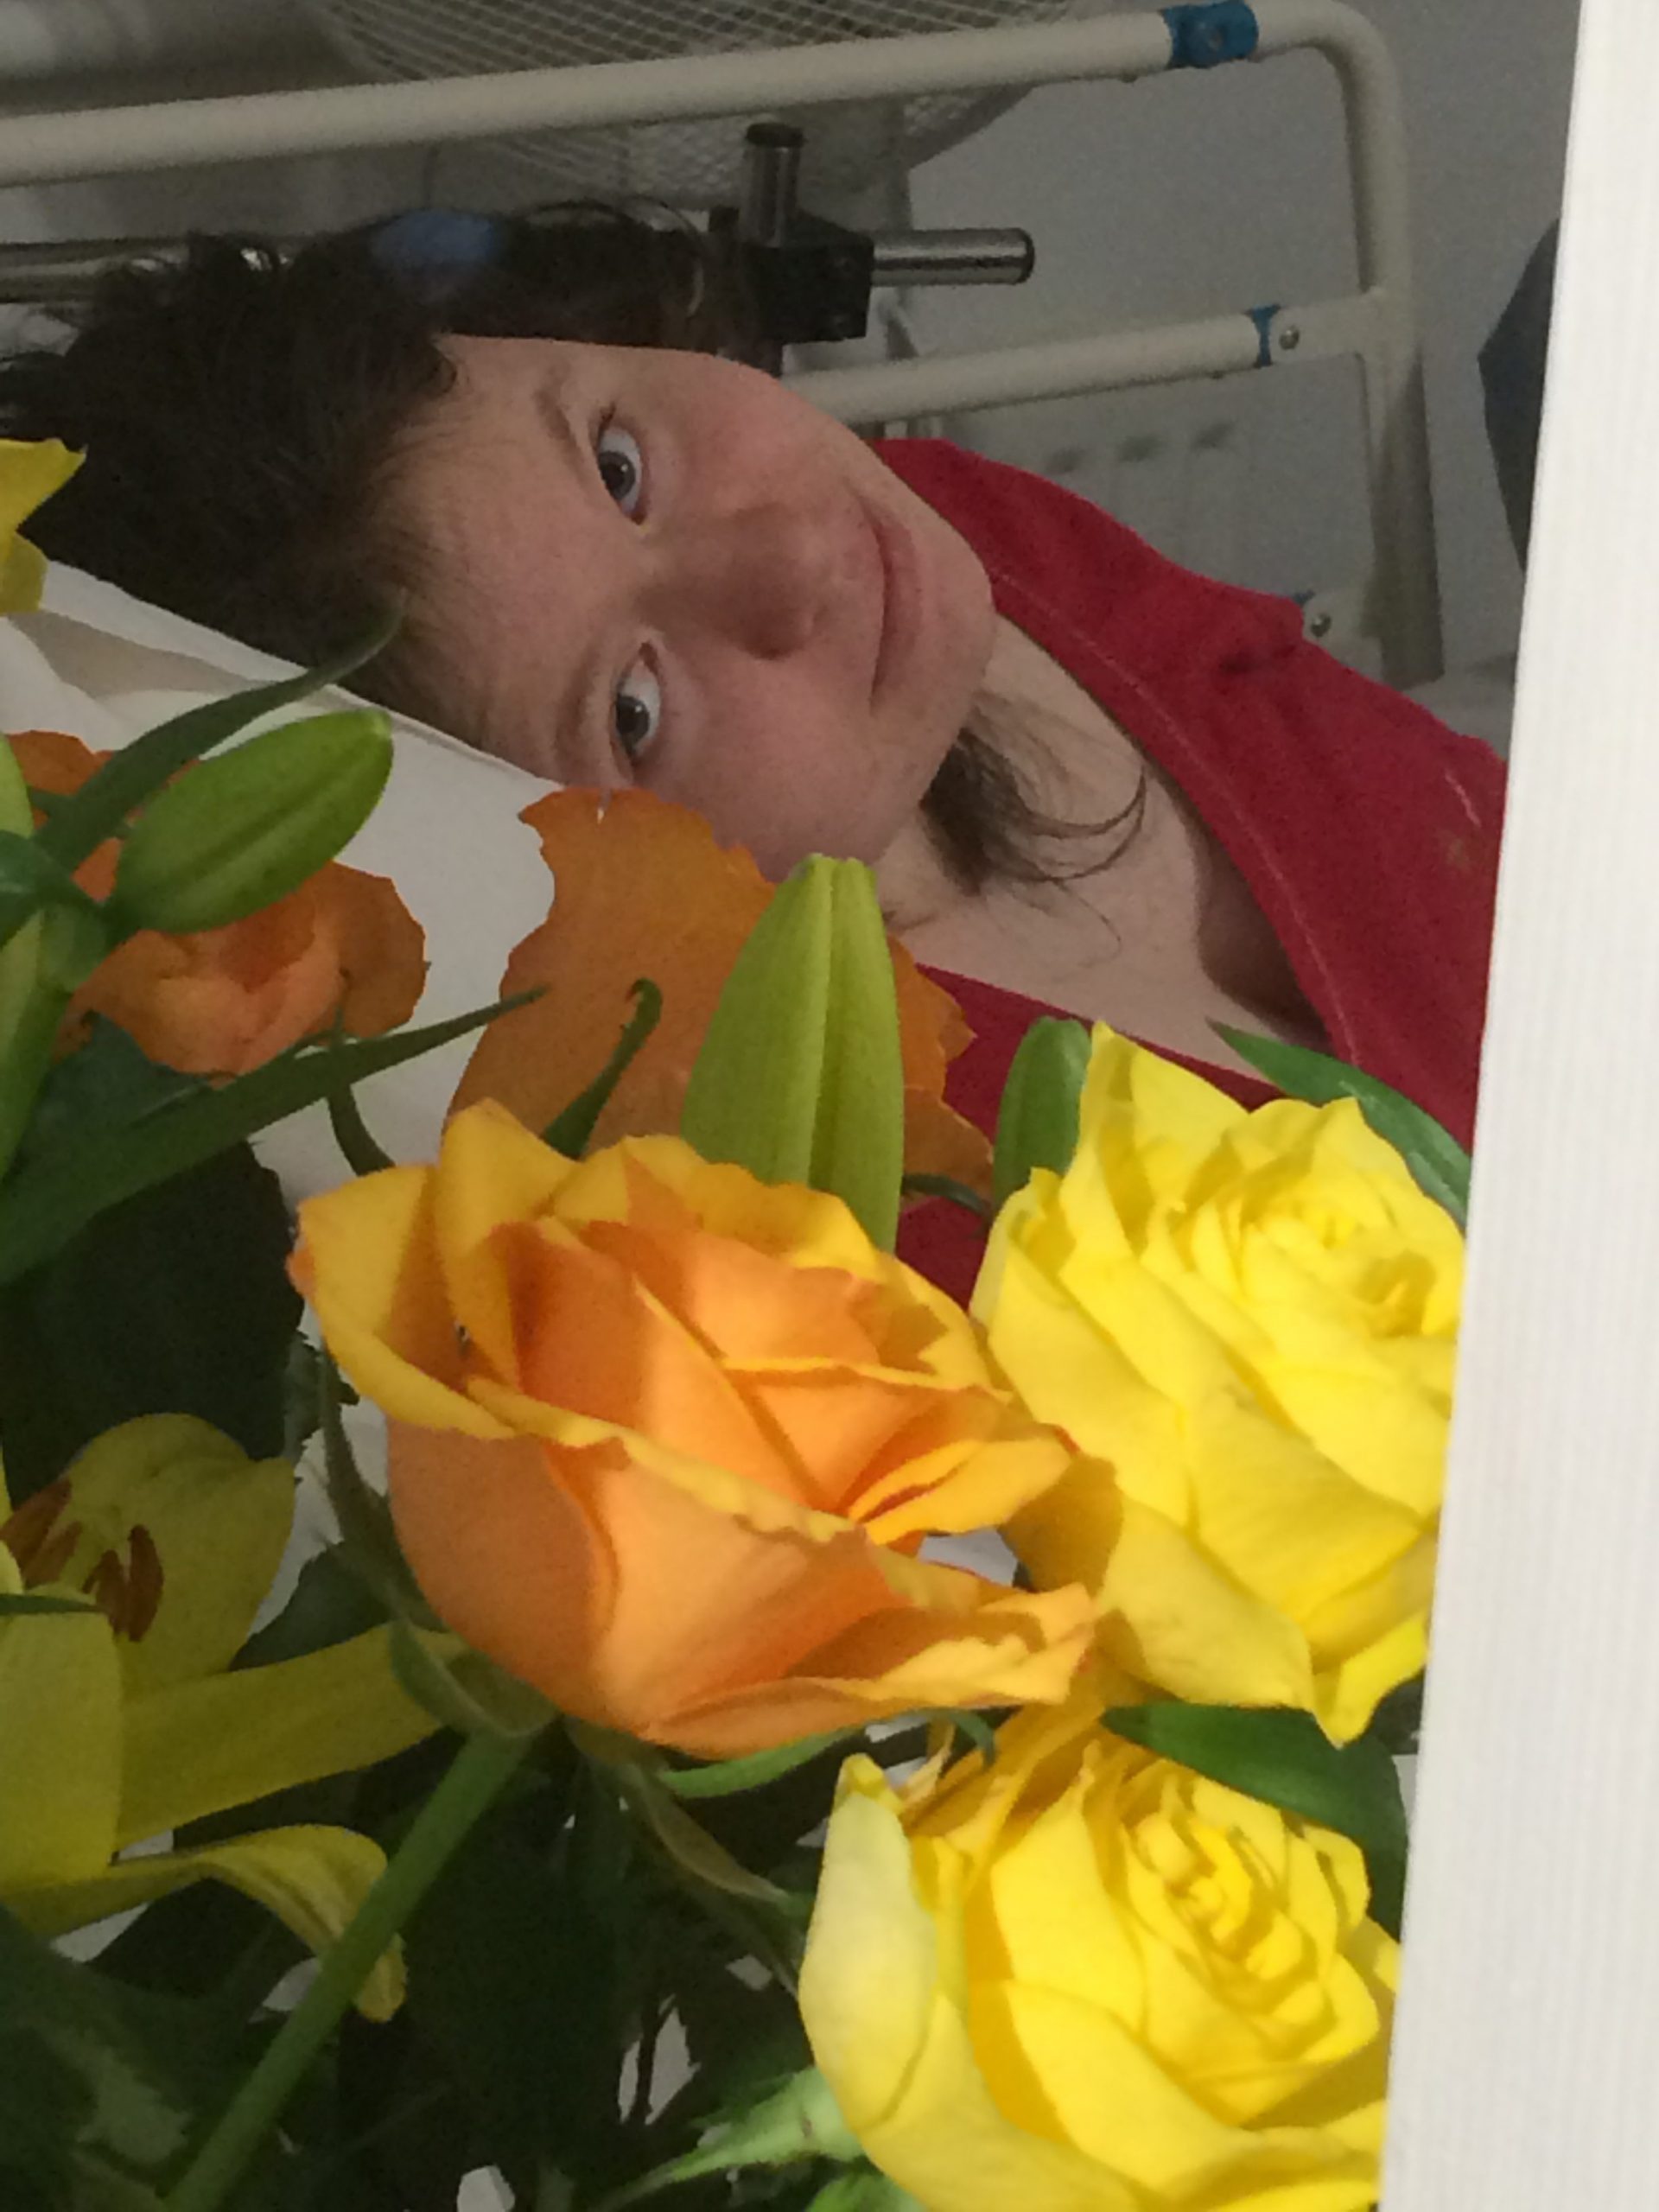 Jade in hospital bed with roses